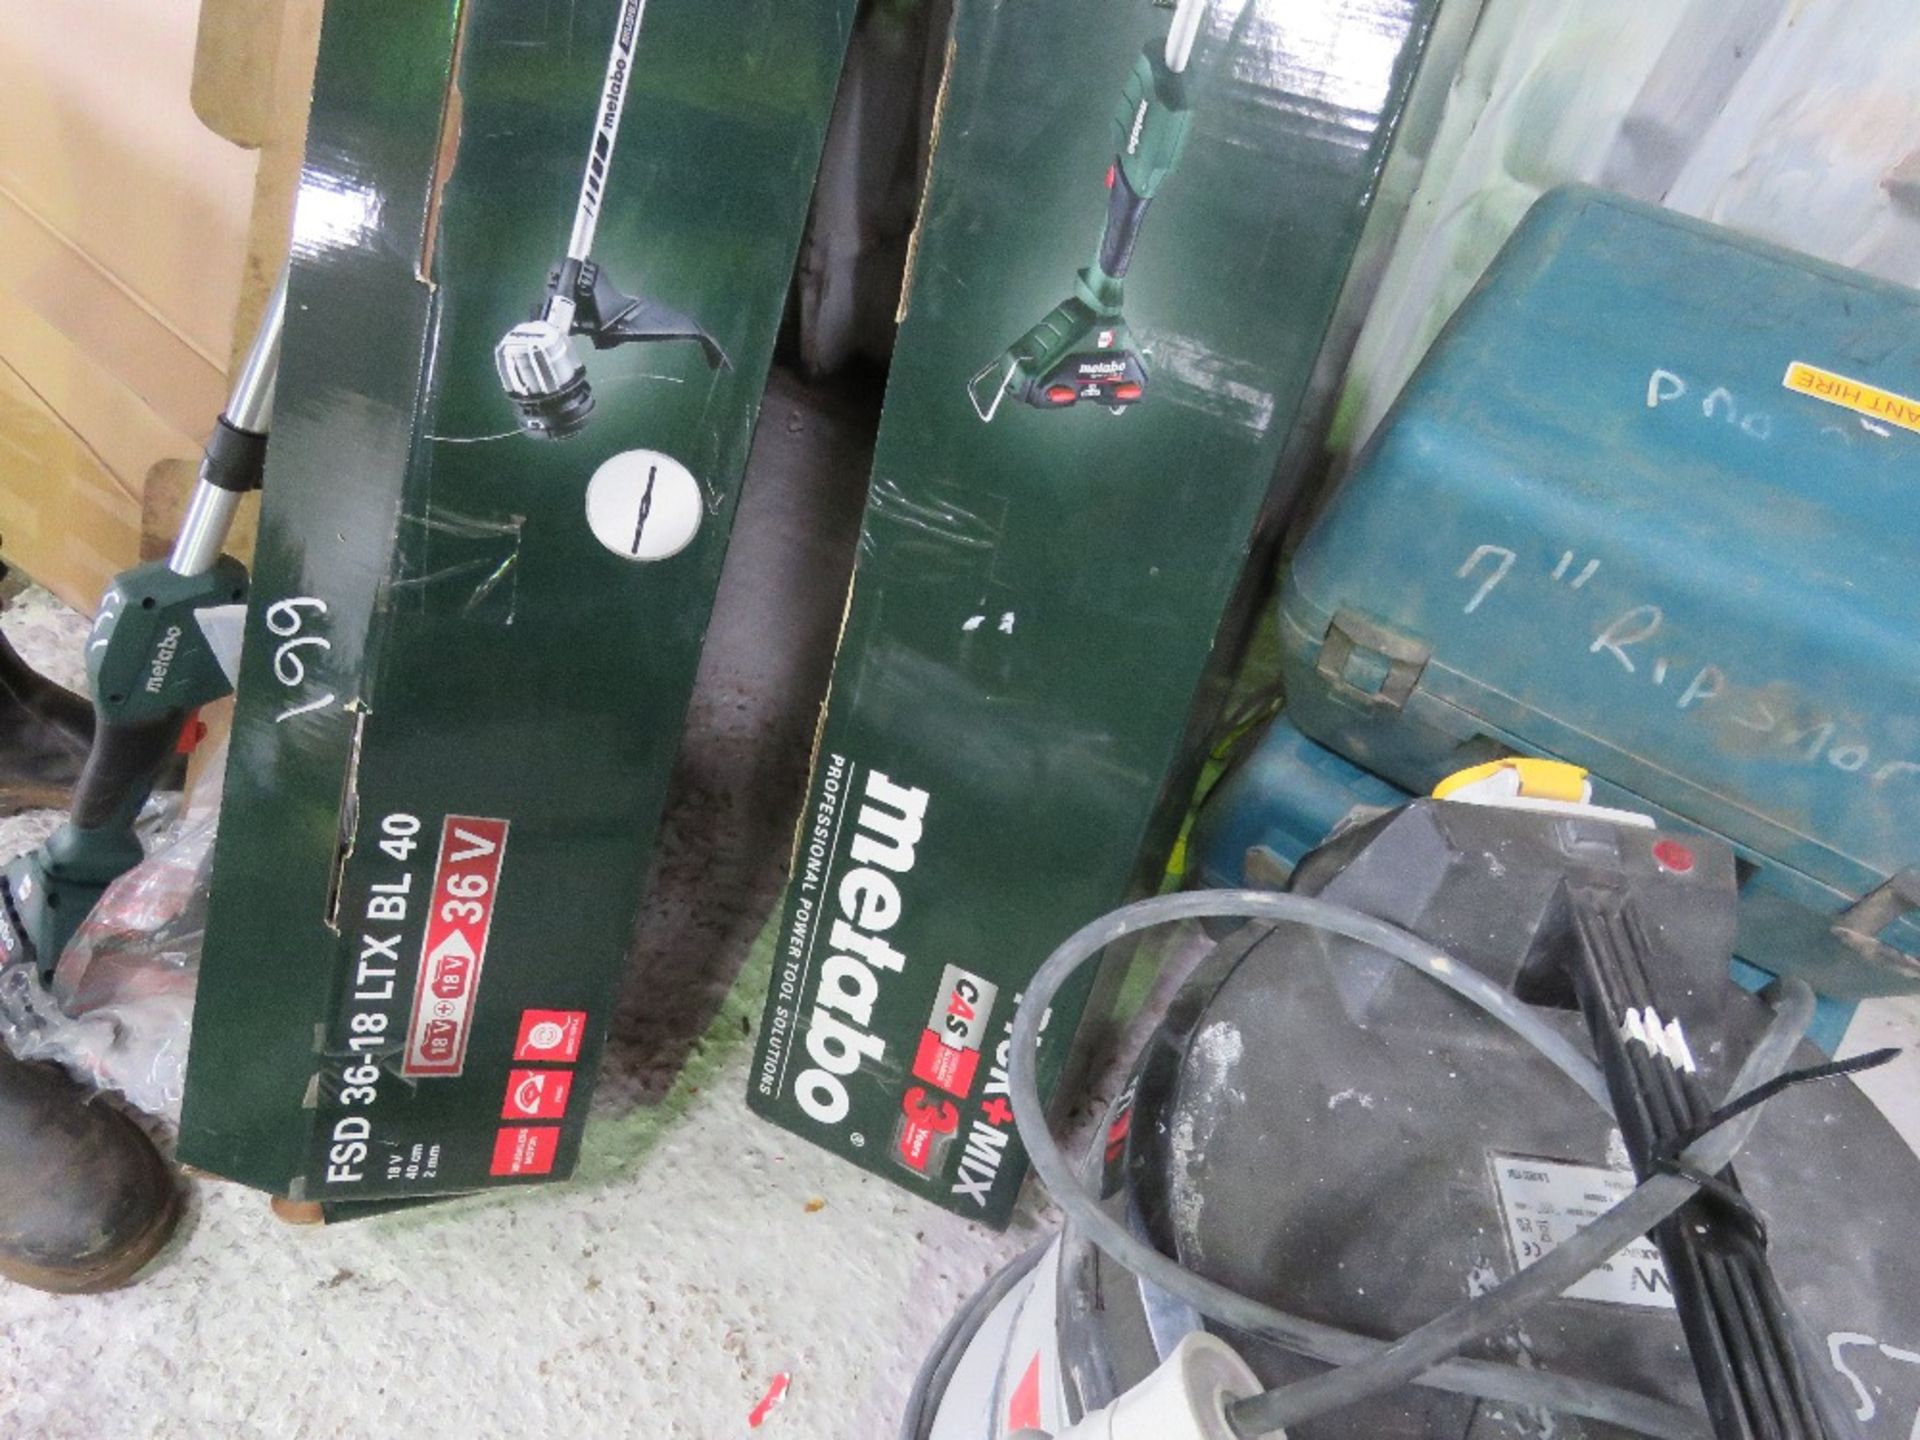 2 X METABO STRAIGHT SHAFT HD 36VOLT BATTERY BRUSH CUTTERS/STRIMMERS, NO BATTERIES, UNUSED. THIS L - Image 5 of 6